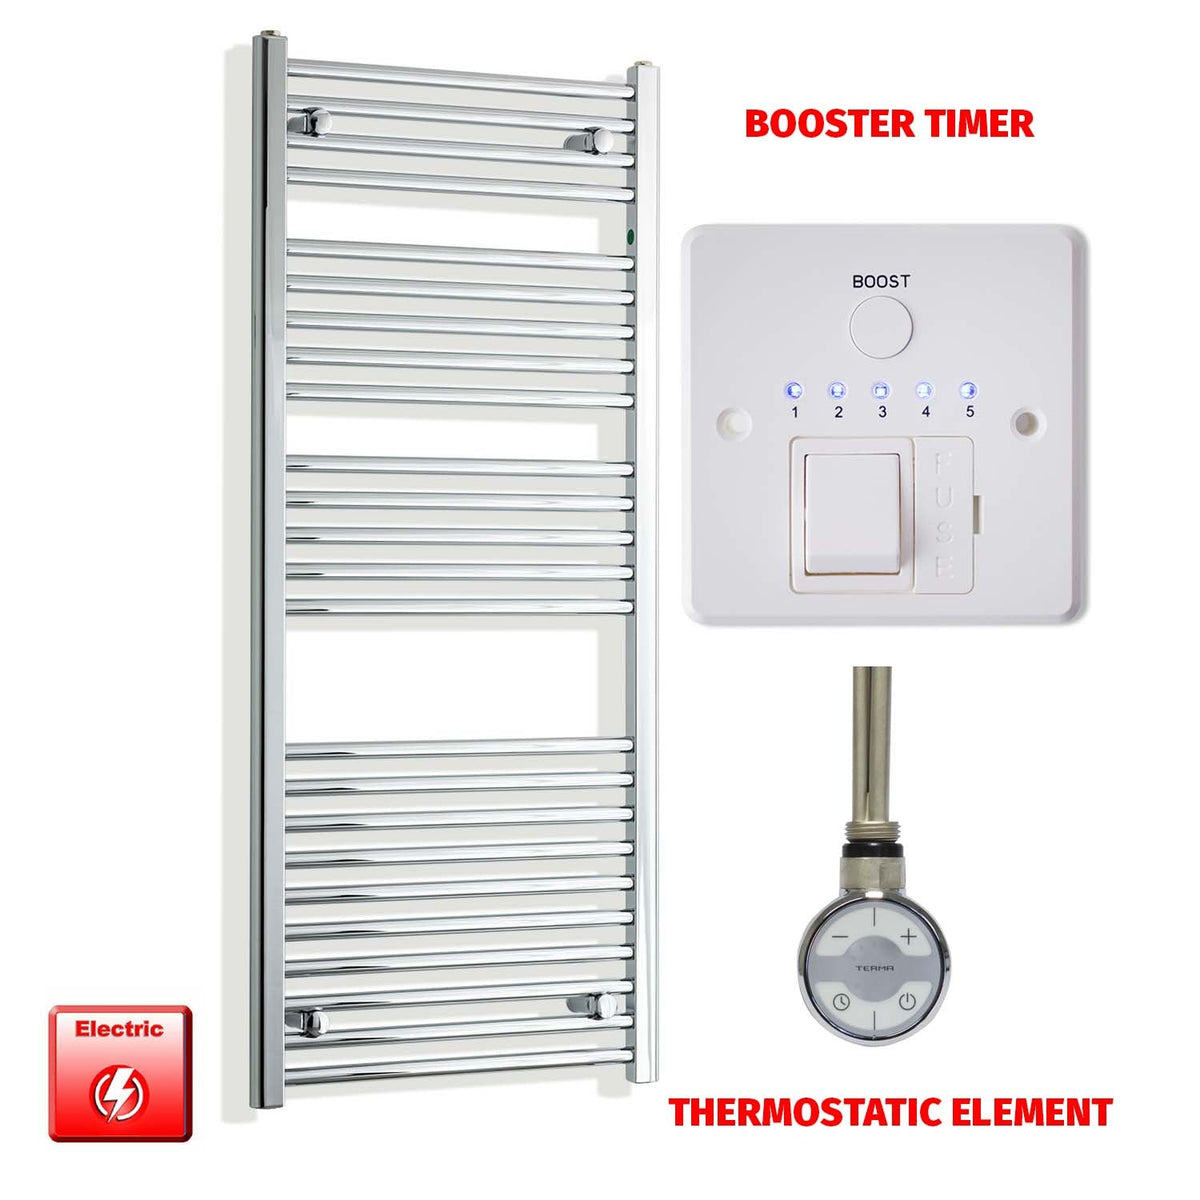 1300mm High 550mm Wide Pre-Filled Electric Heated Towel Radiator Chrome HTR MOA Element Booster Timer